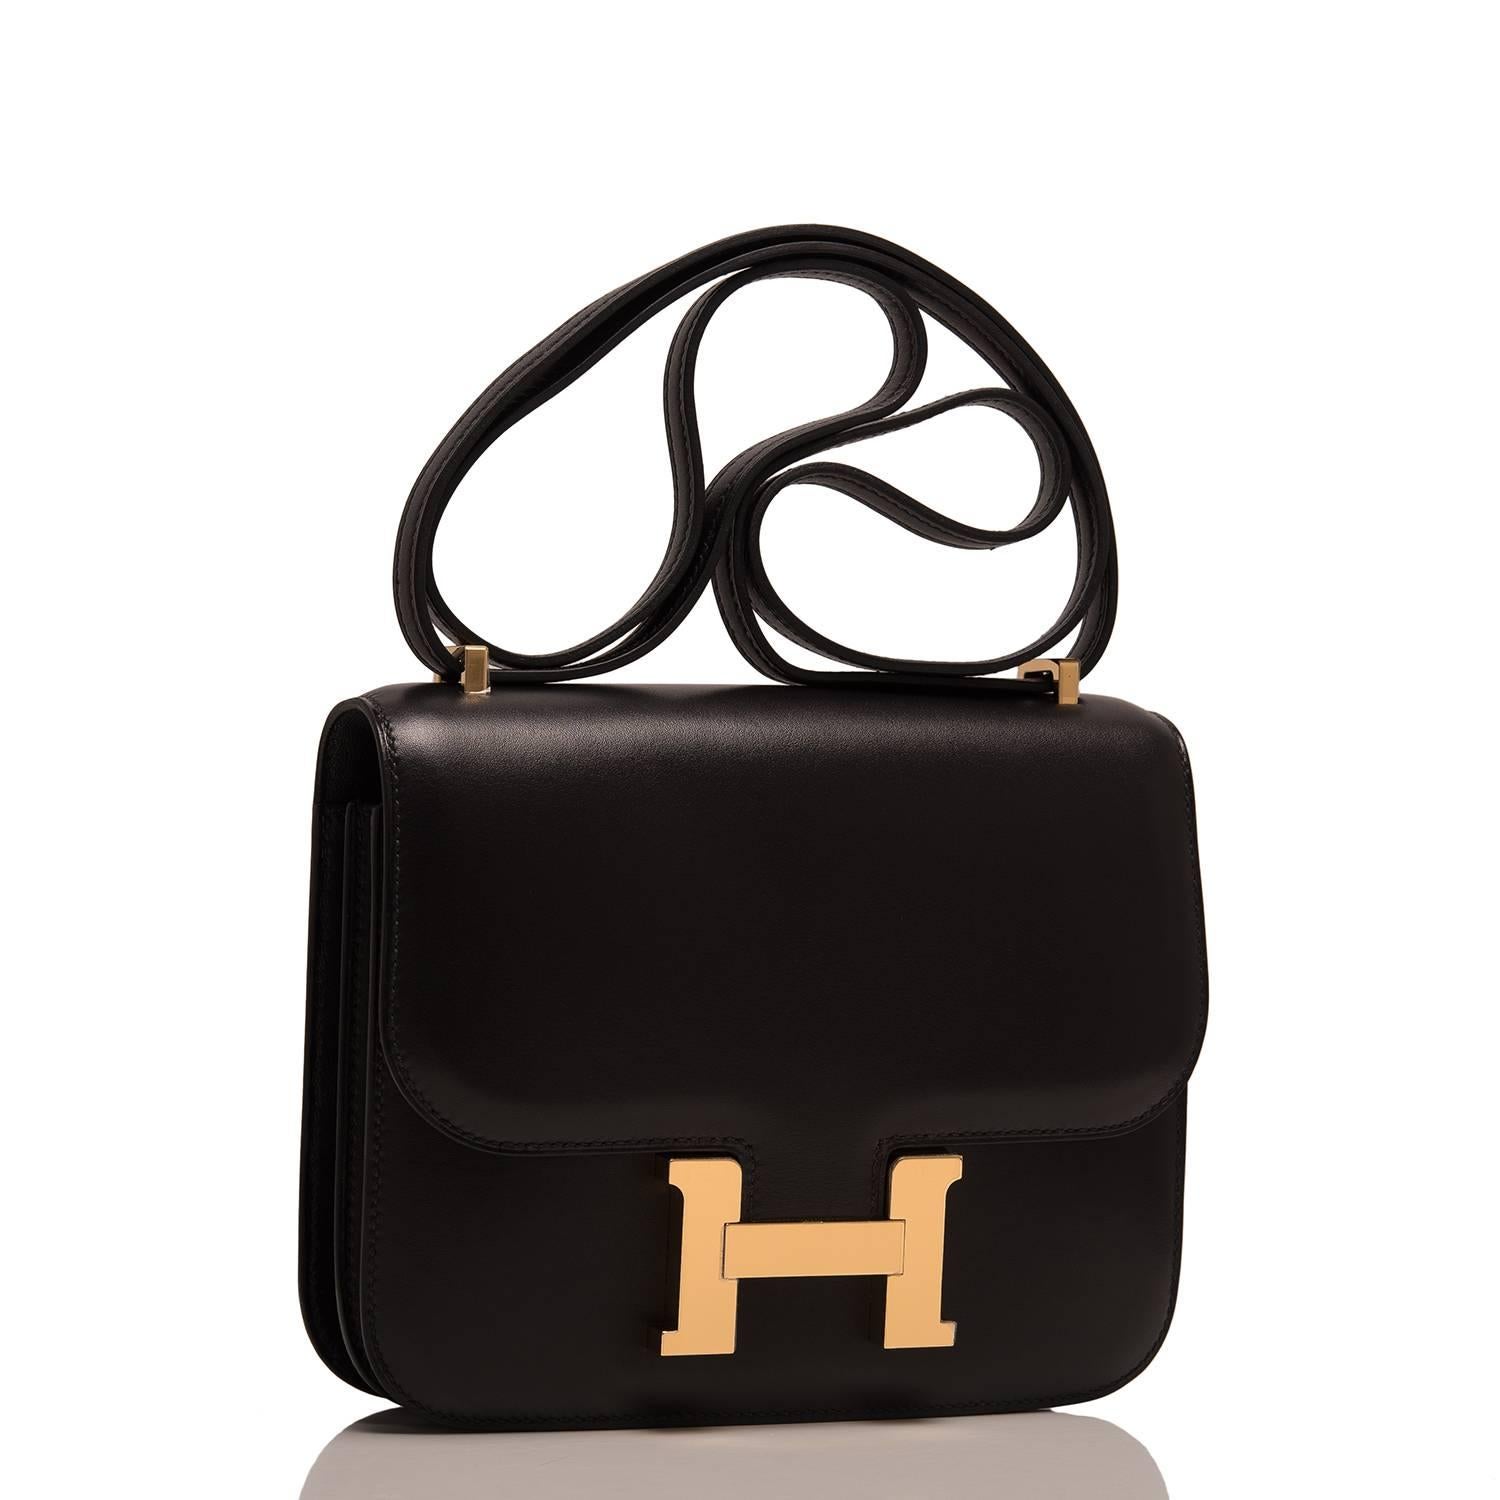 Hermes black Mini Constance 18cm of evercalf leather with gold hardware.

This Constance has tonal stitching, a metal